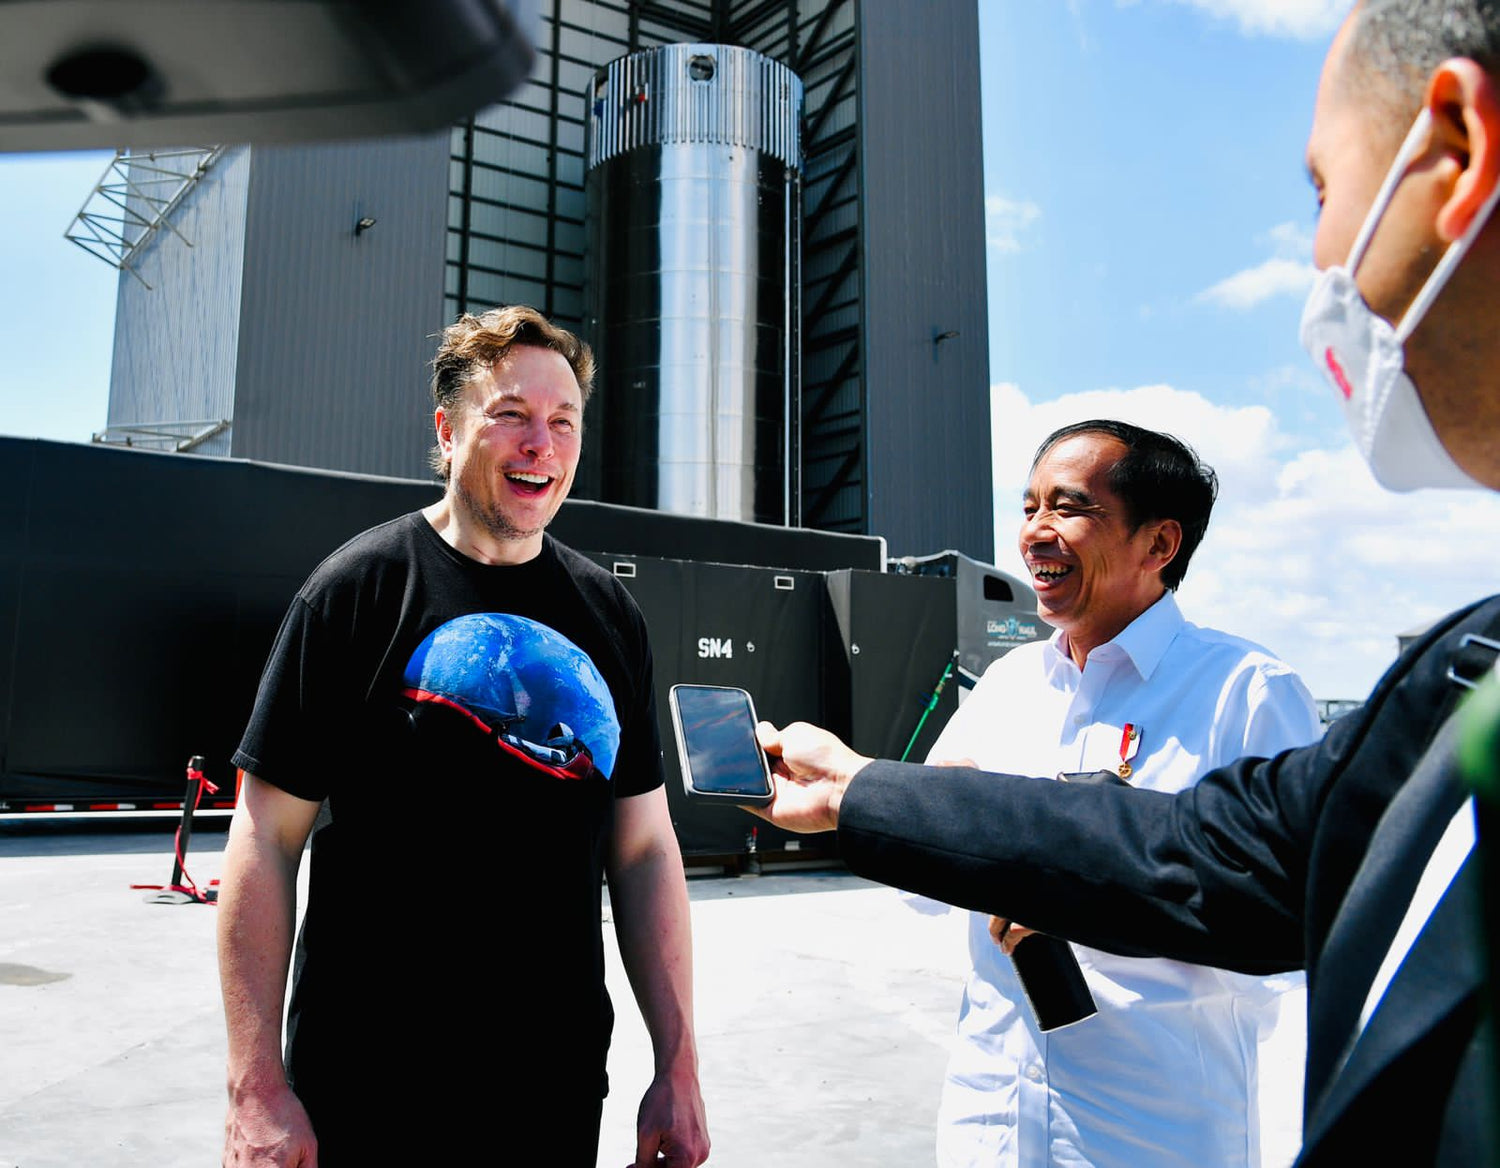 The President of Indonesia Meets Elon Musk At SpaceX Starbase Texas